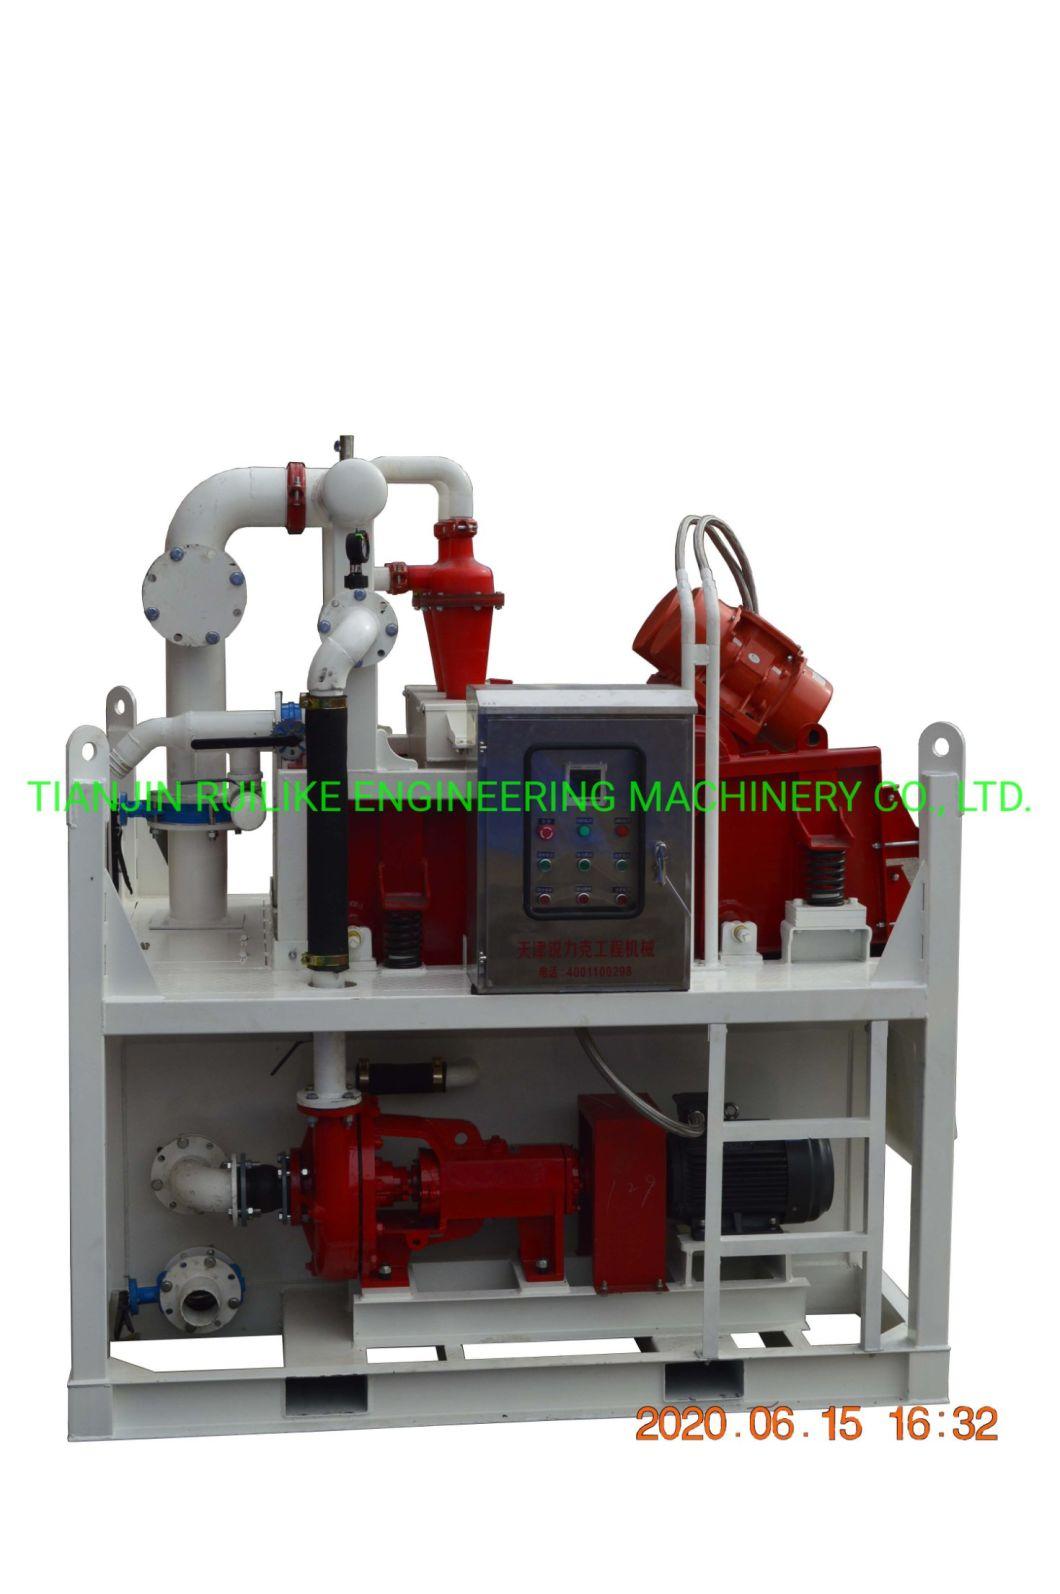 Shale Shaker Solid Control Equipment Used for Drilling Mud